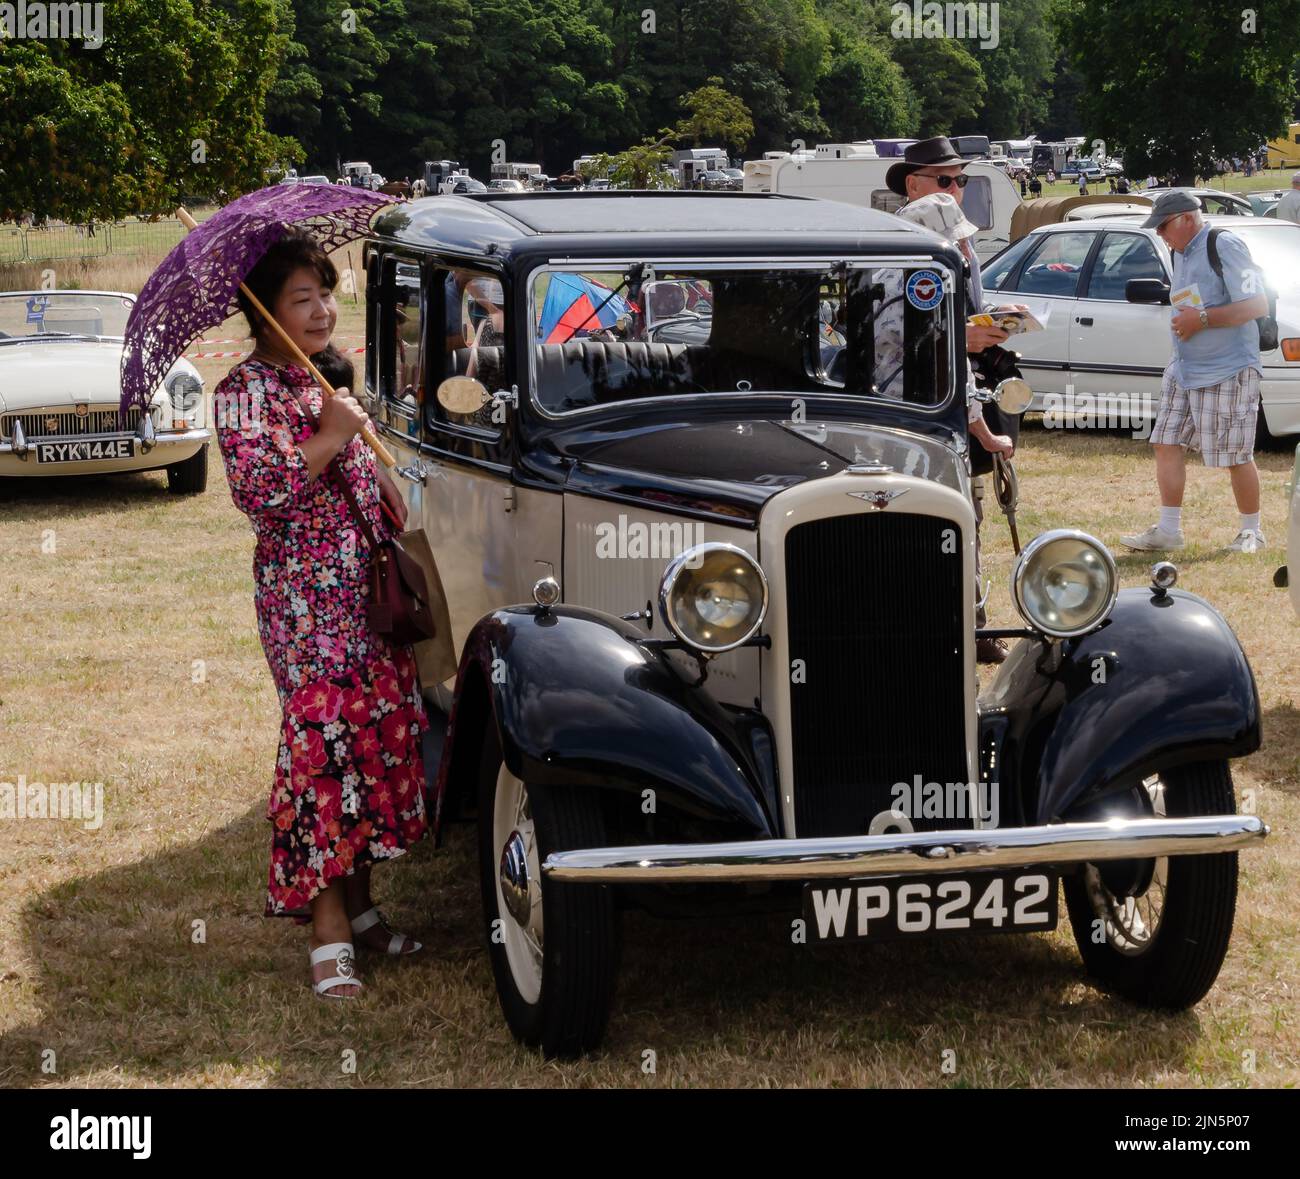 Lady with parasol next to classic vintage car Stock Photo